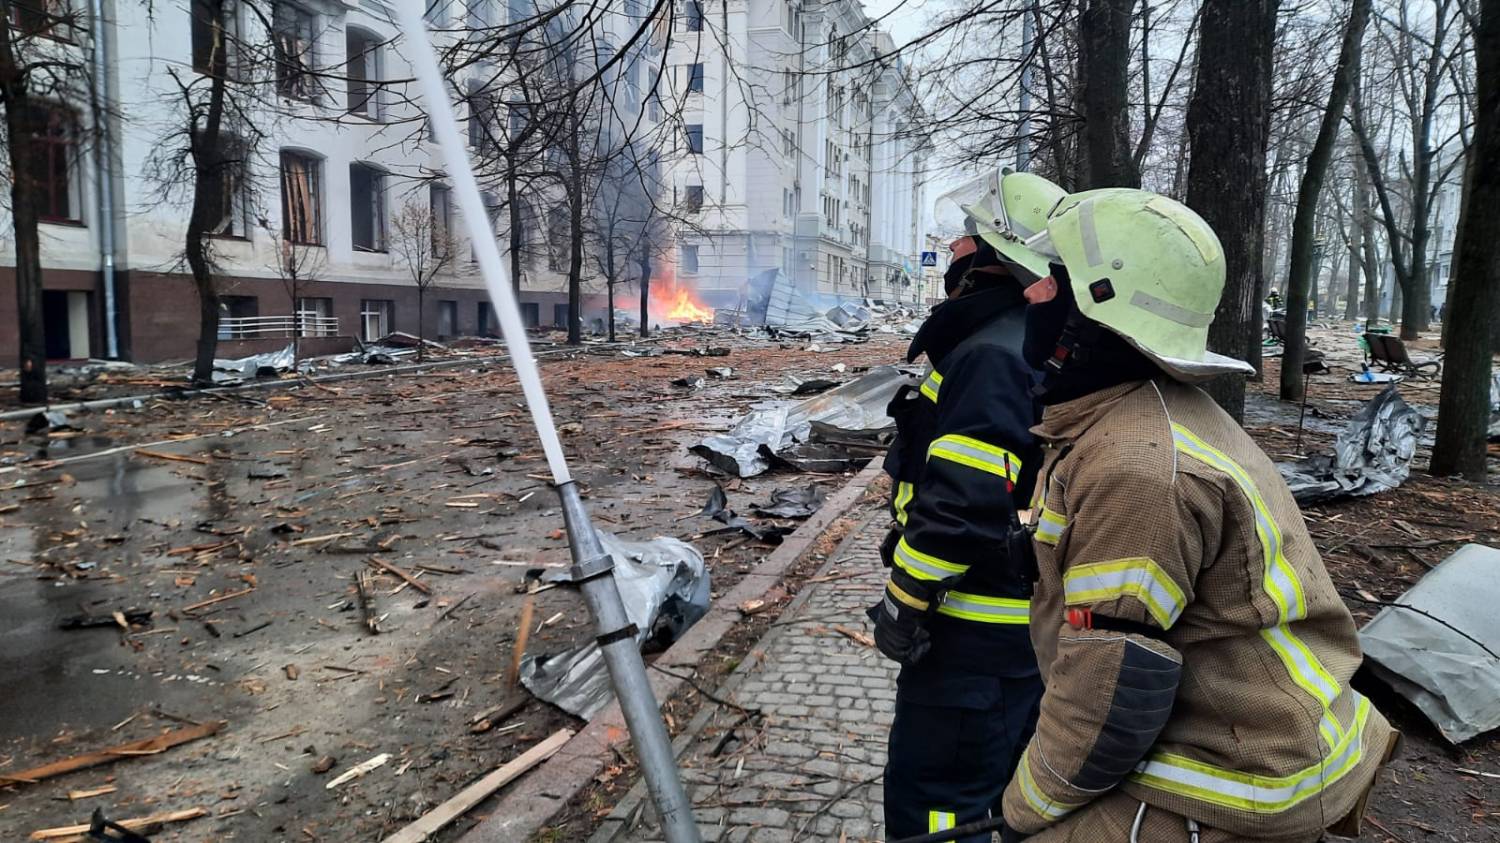 Buildings of the Security Service of Ukraine (SBU), the State Unitary Enterprise of the National Police and the Kharkiv National University in the Kharkiv, second largest city of Ukraine is struck by a Russia army missile at about 08:10 on March 2, 2022. (State Emergency Service of Ukraine/EYEPRESS)